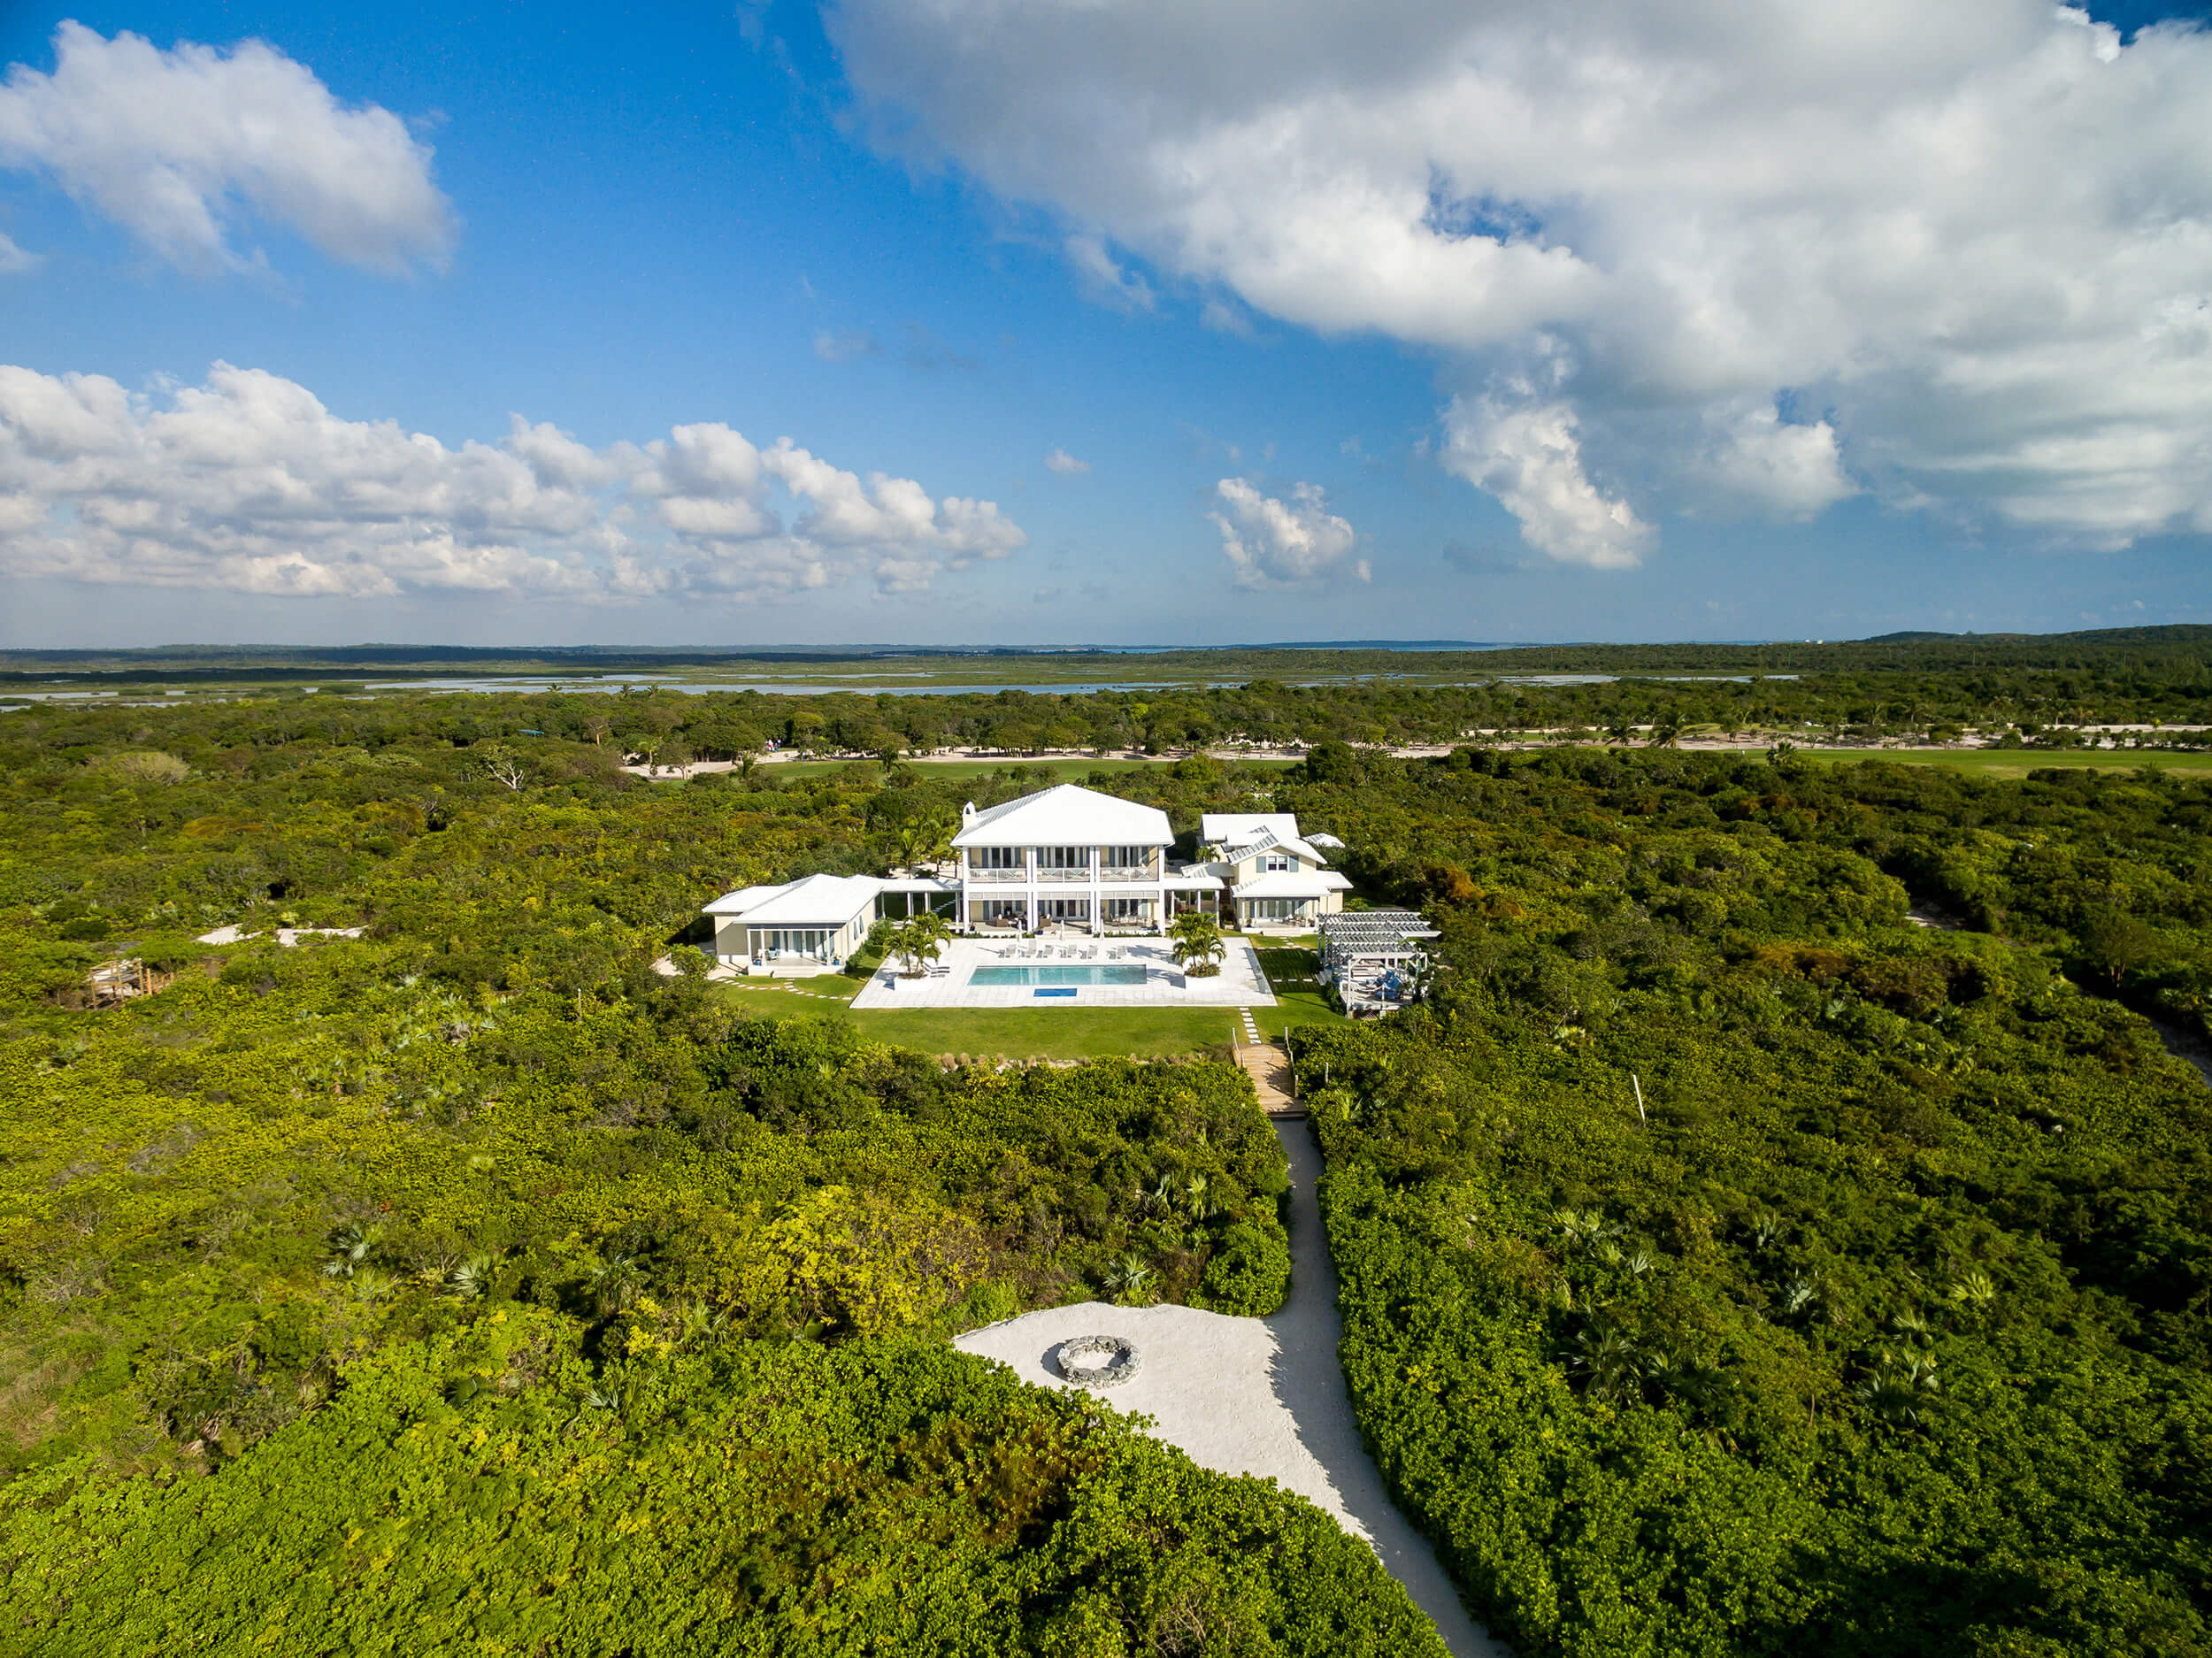 Drone image of a luxury property at The Abaco Club